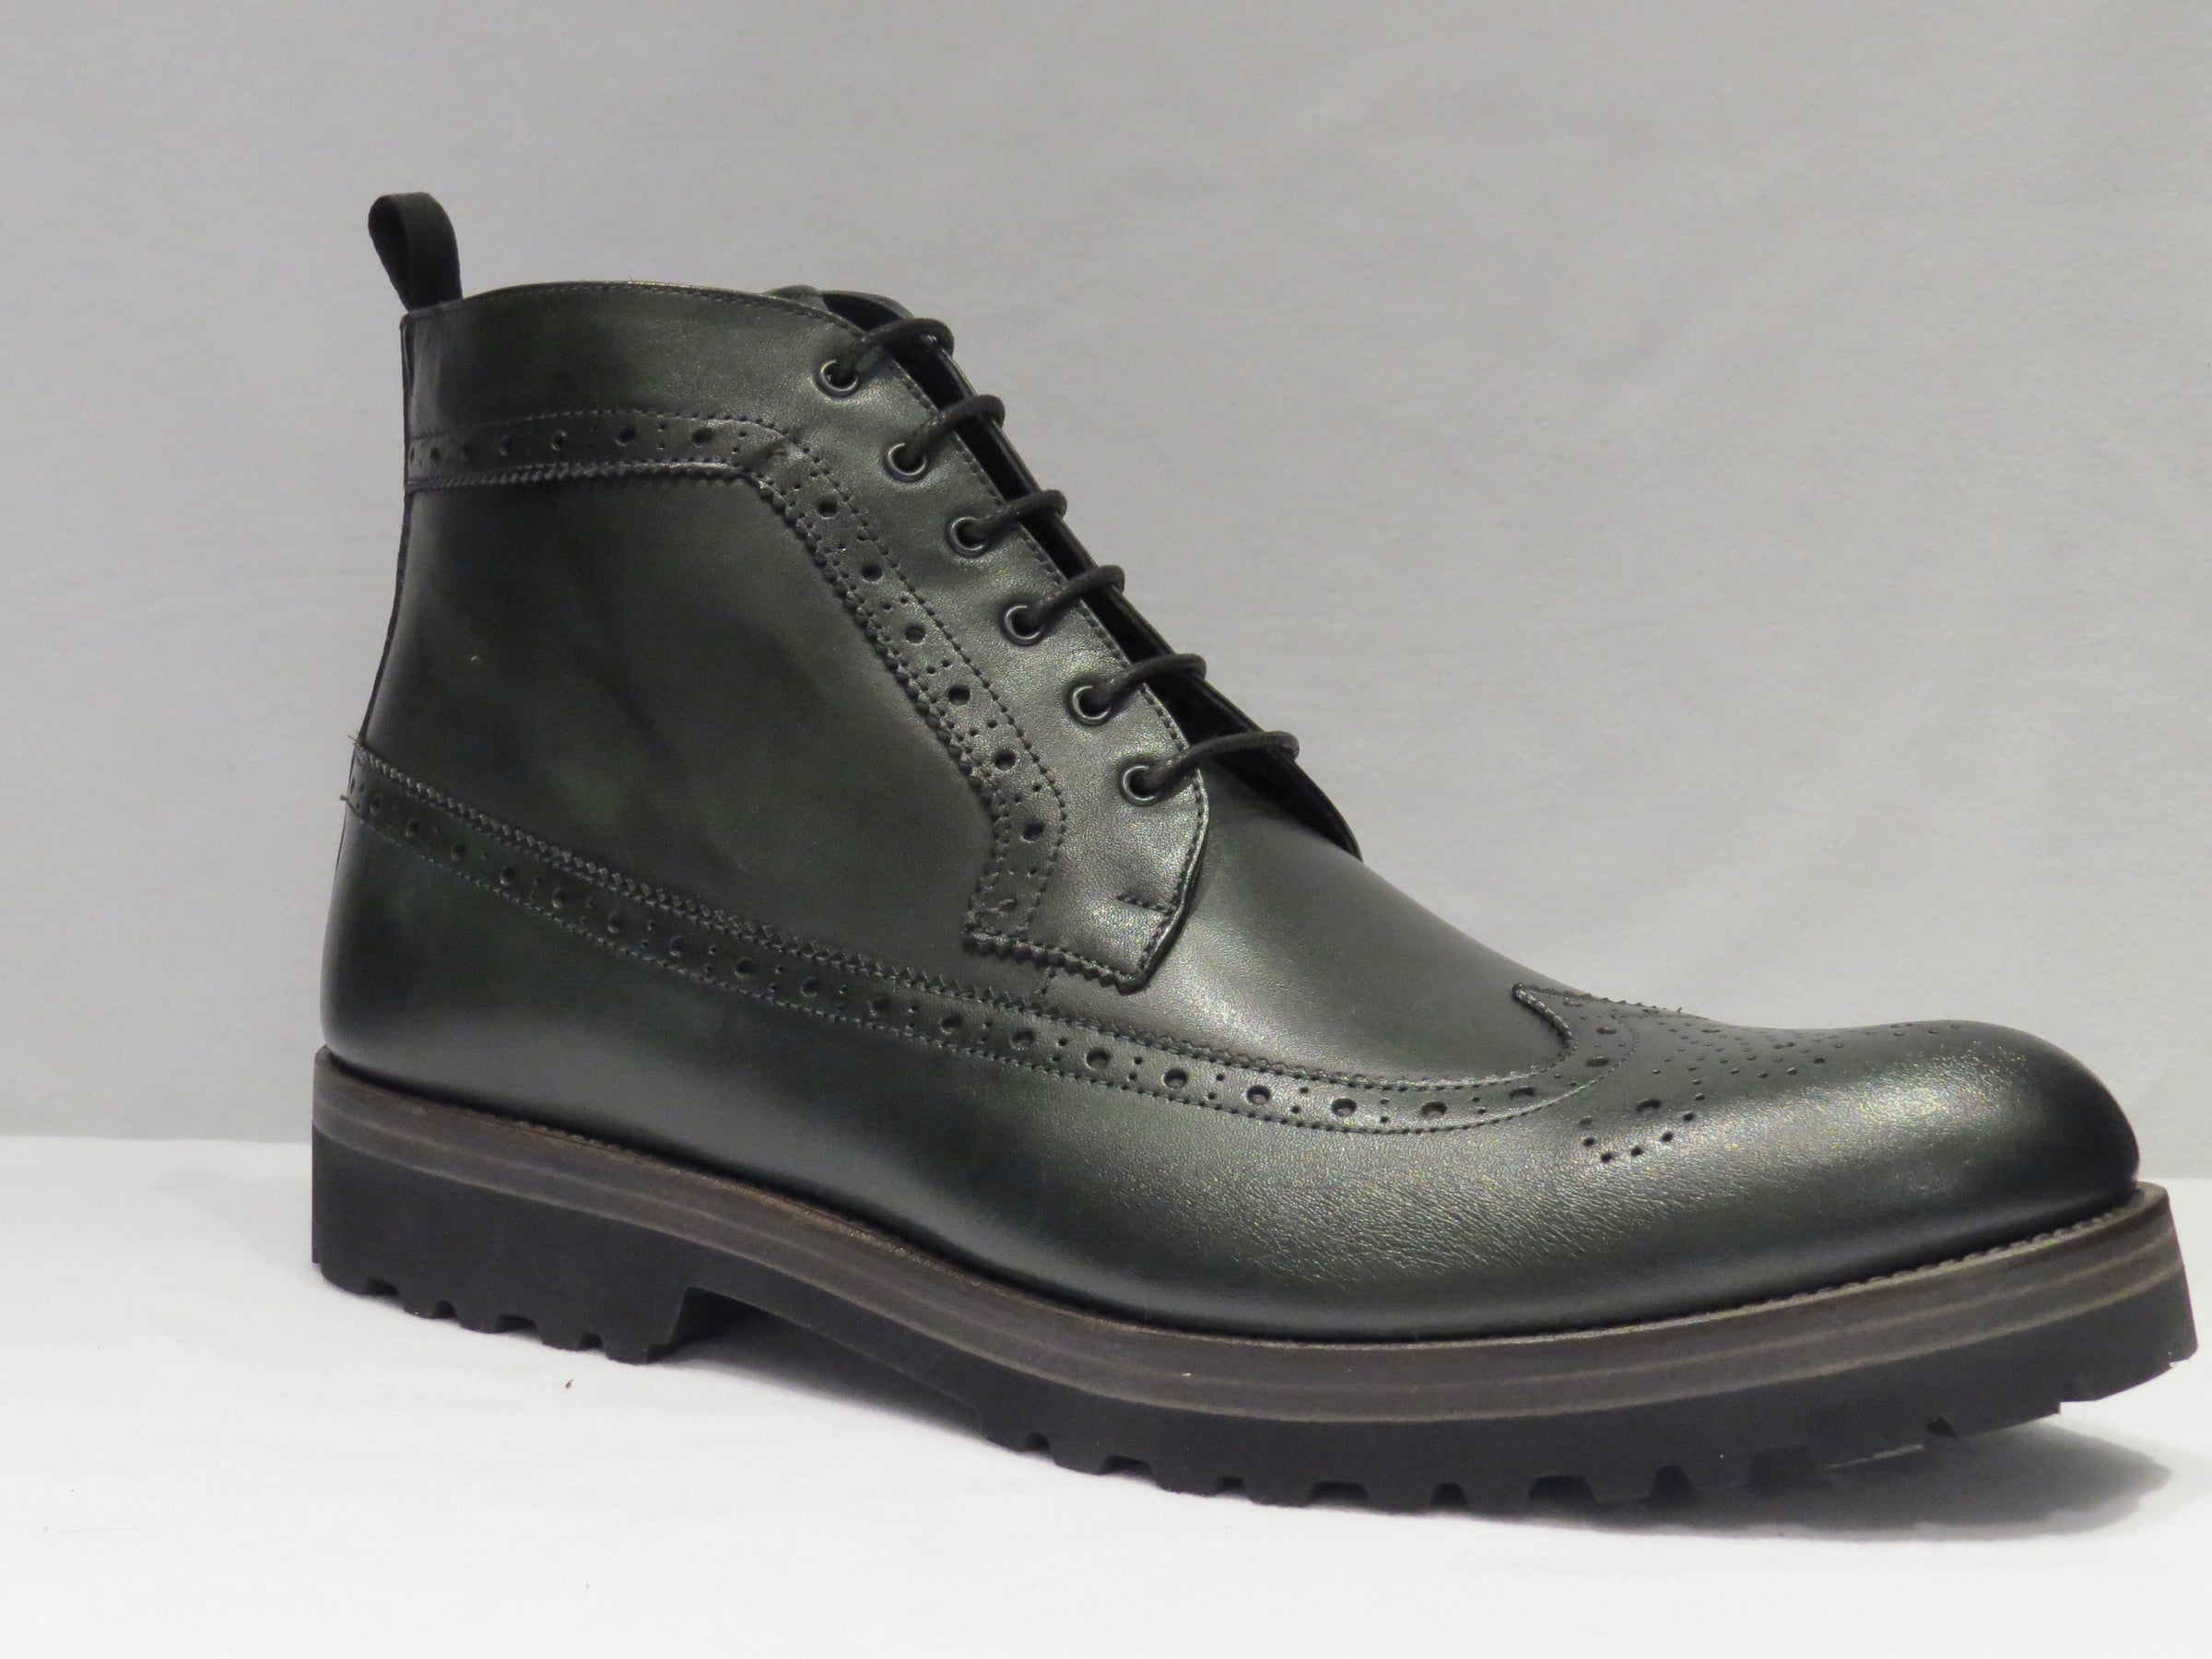 Emilio Franco Hunter Green Wingtip Lace Up Boot with Vibram Bottom ...